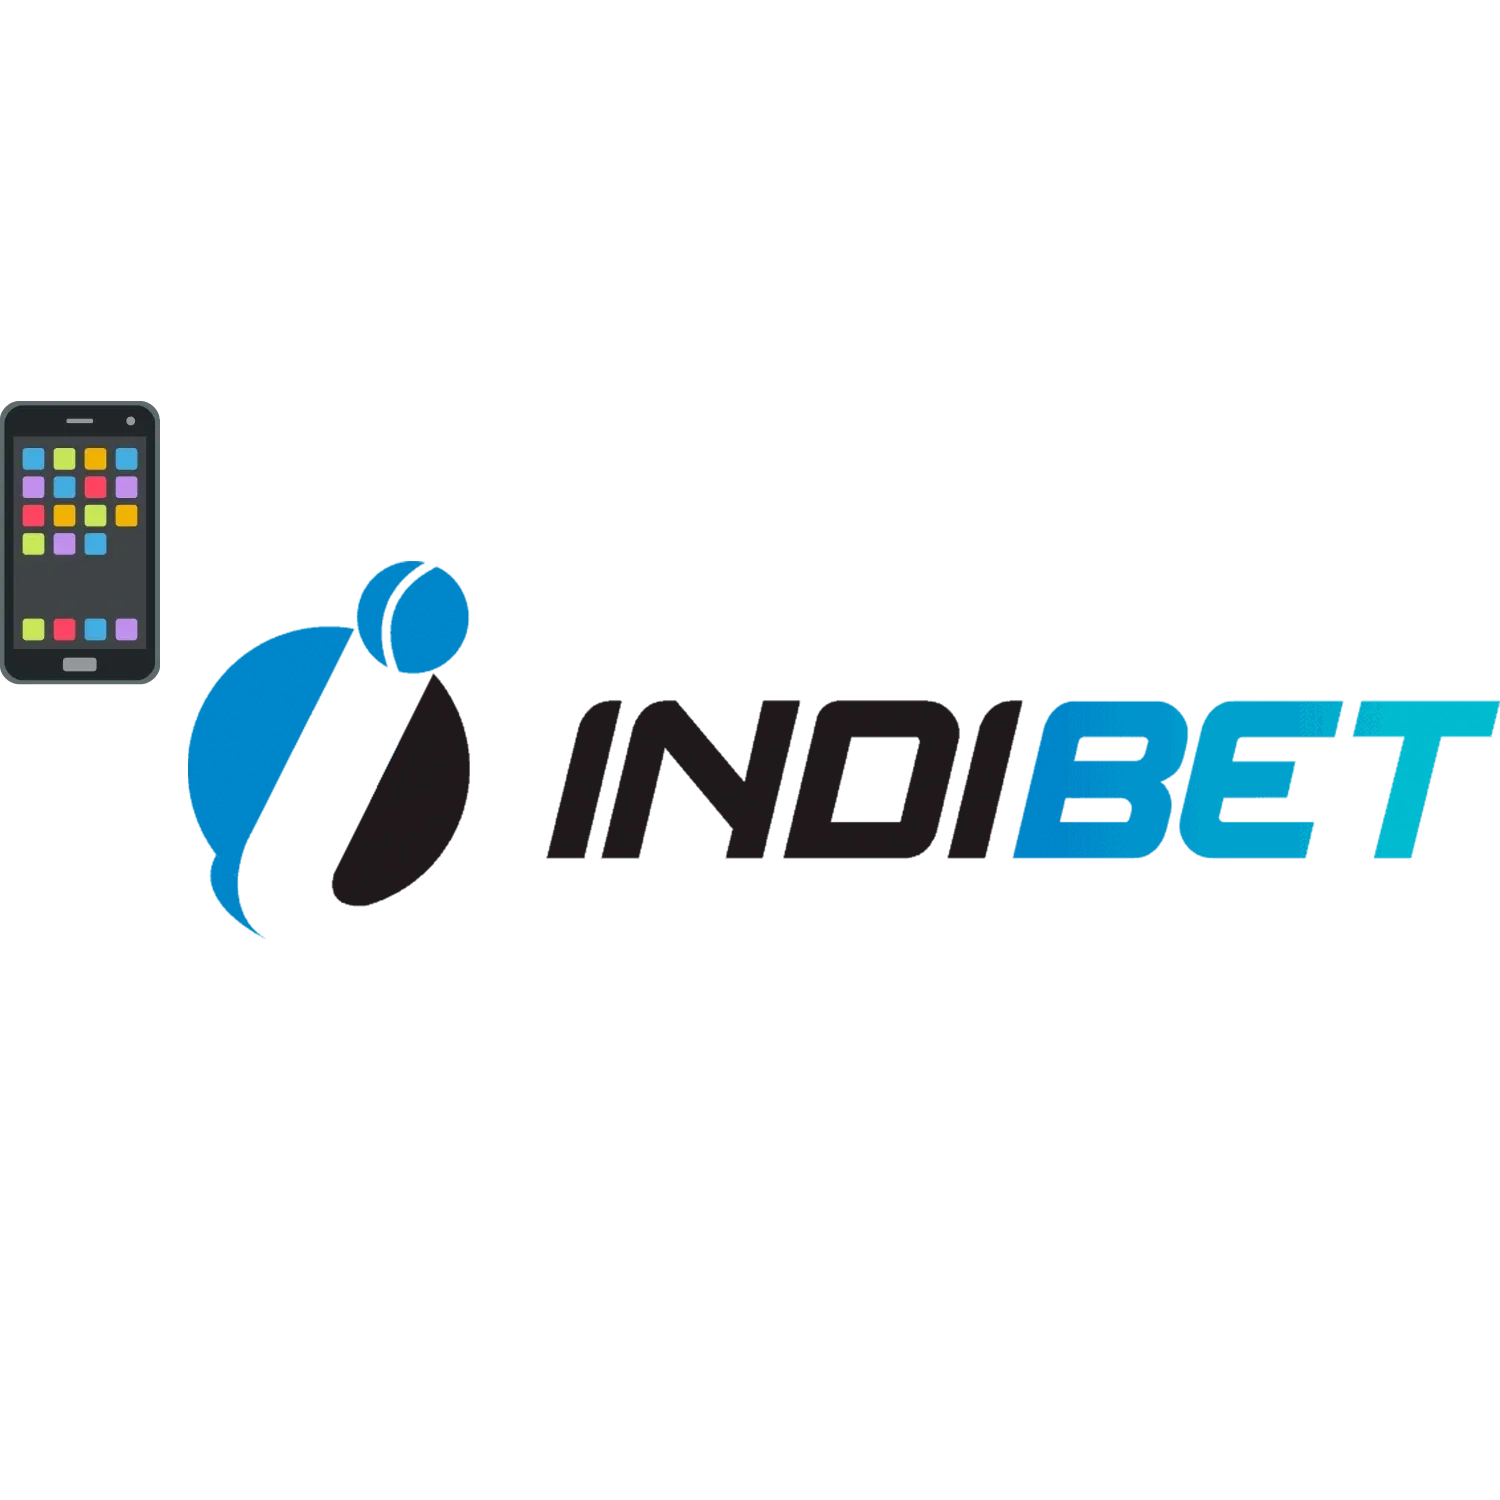 Indibet app includes most of the well-known games in the casino industry.